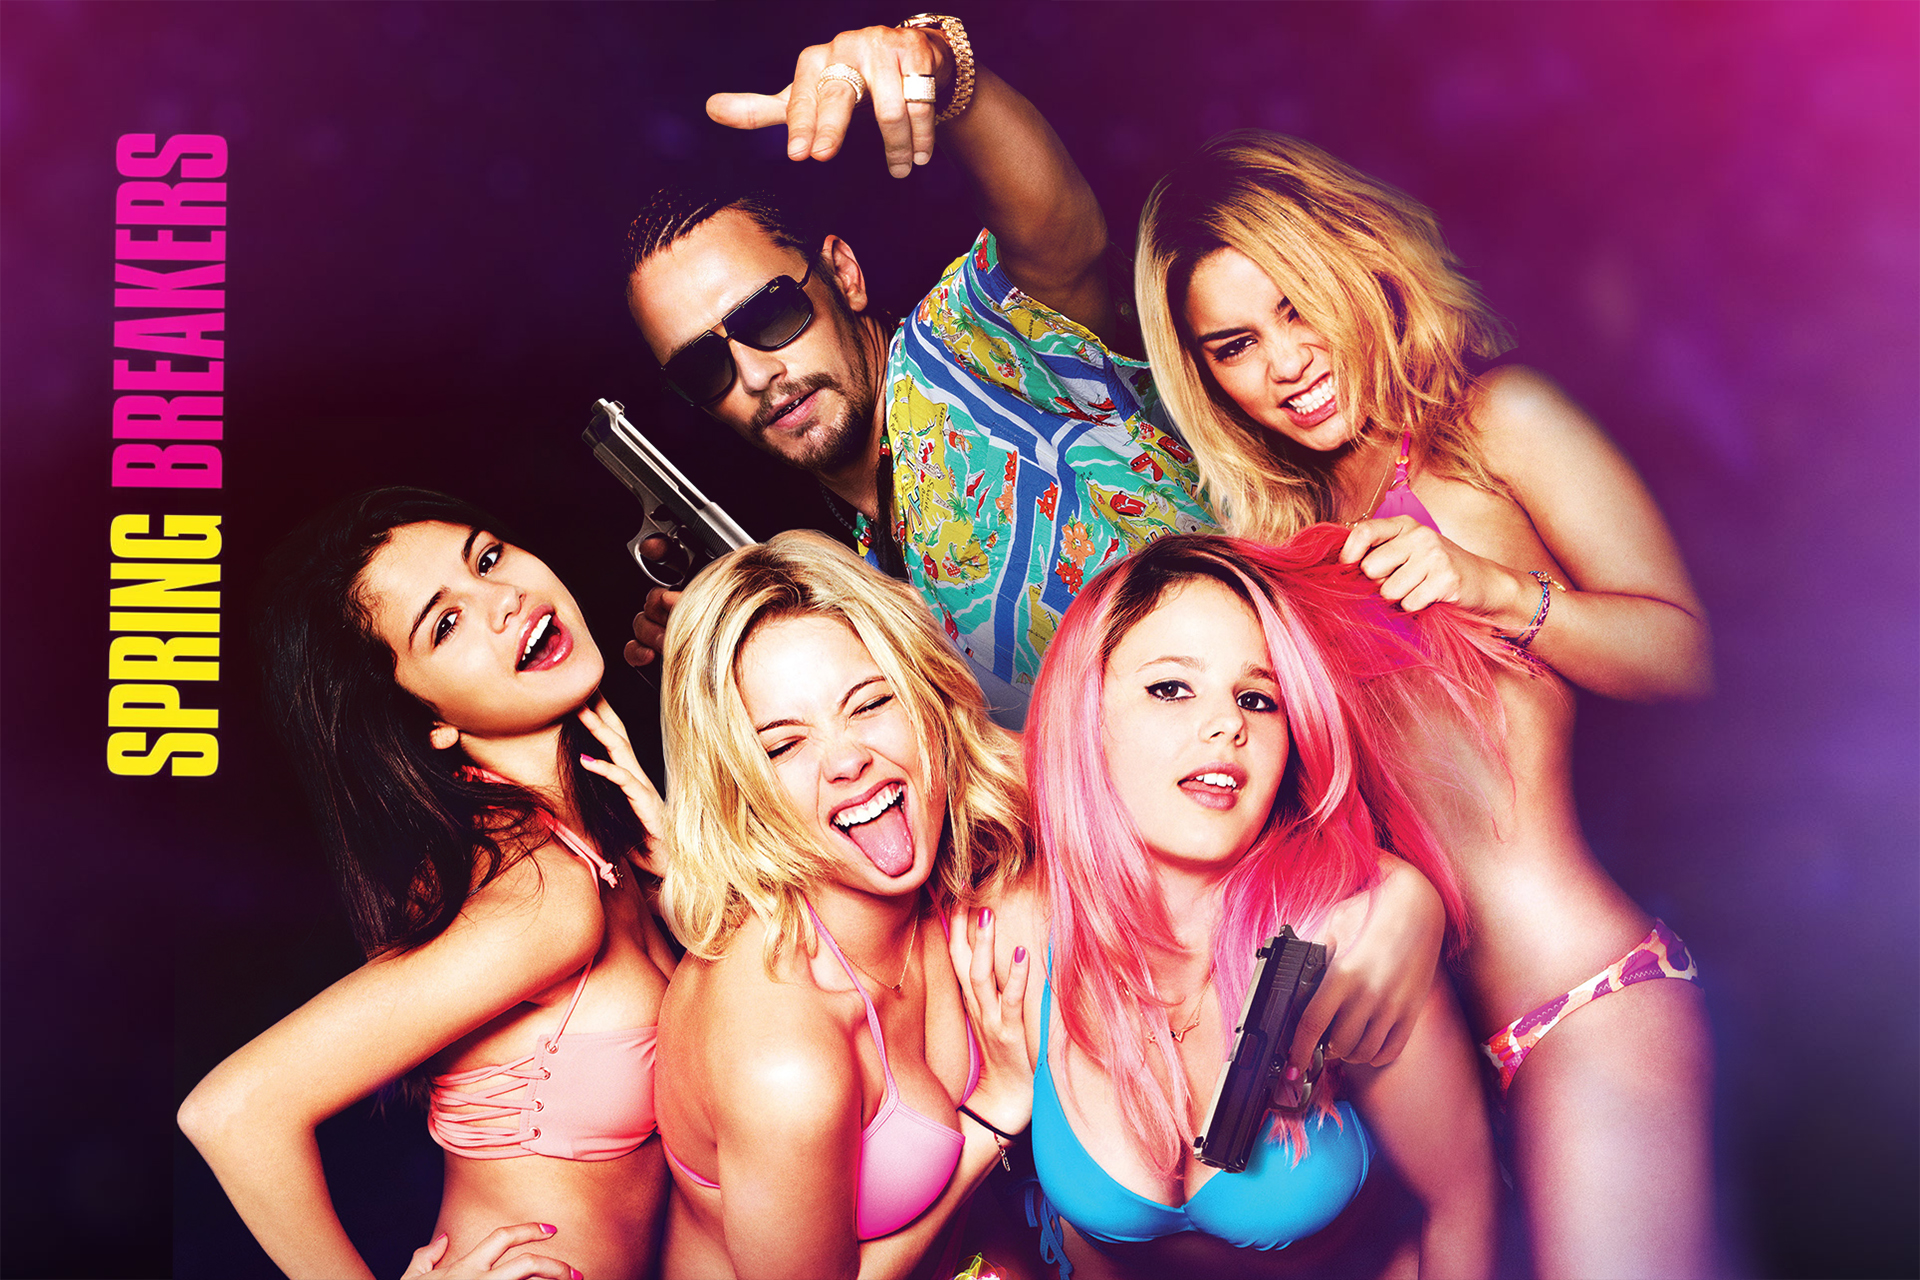 bobby grubb reccomend spring breakers full movie free online pic